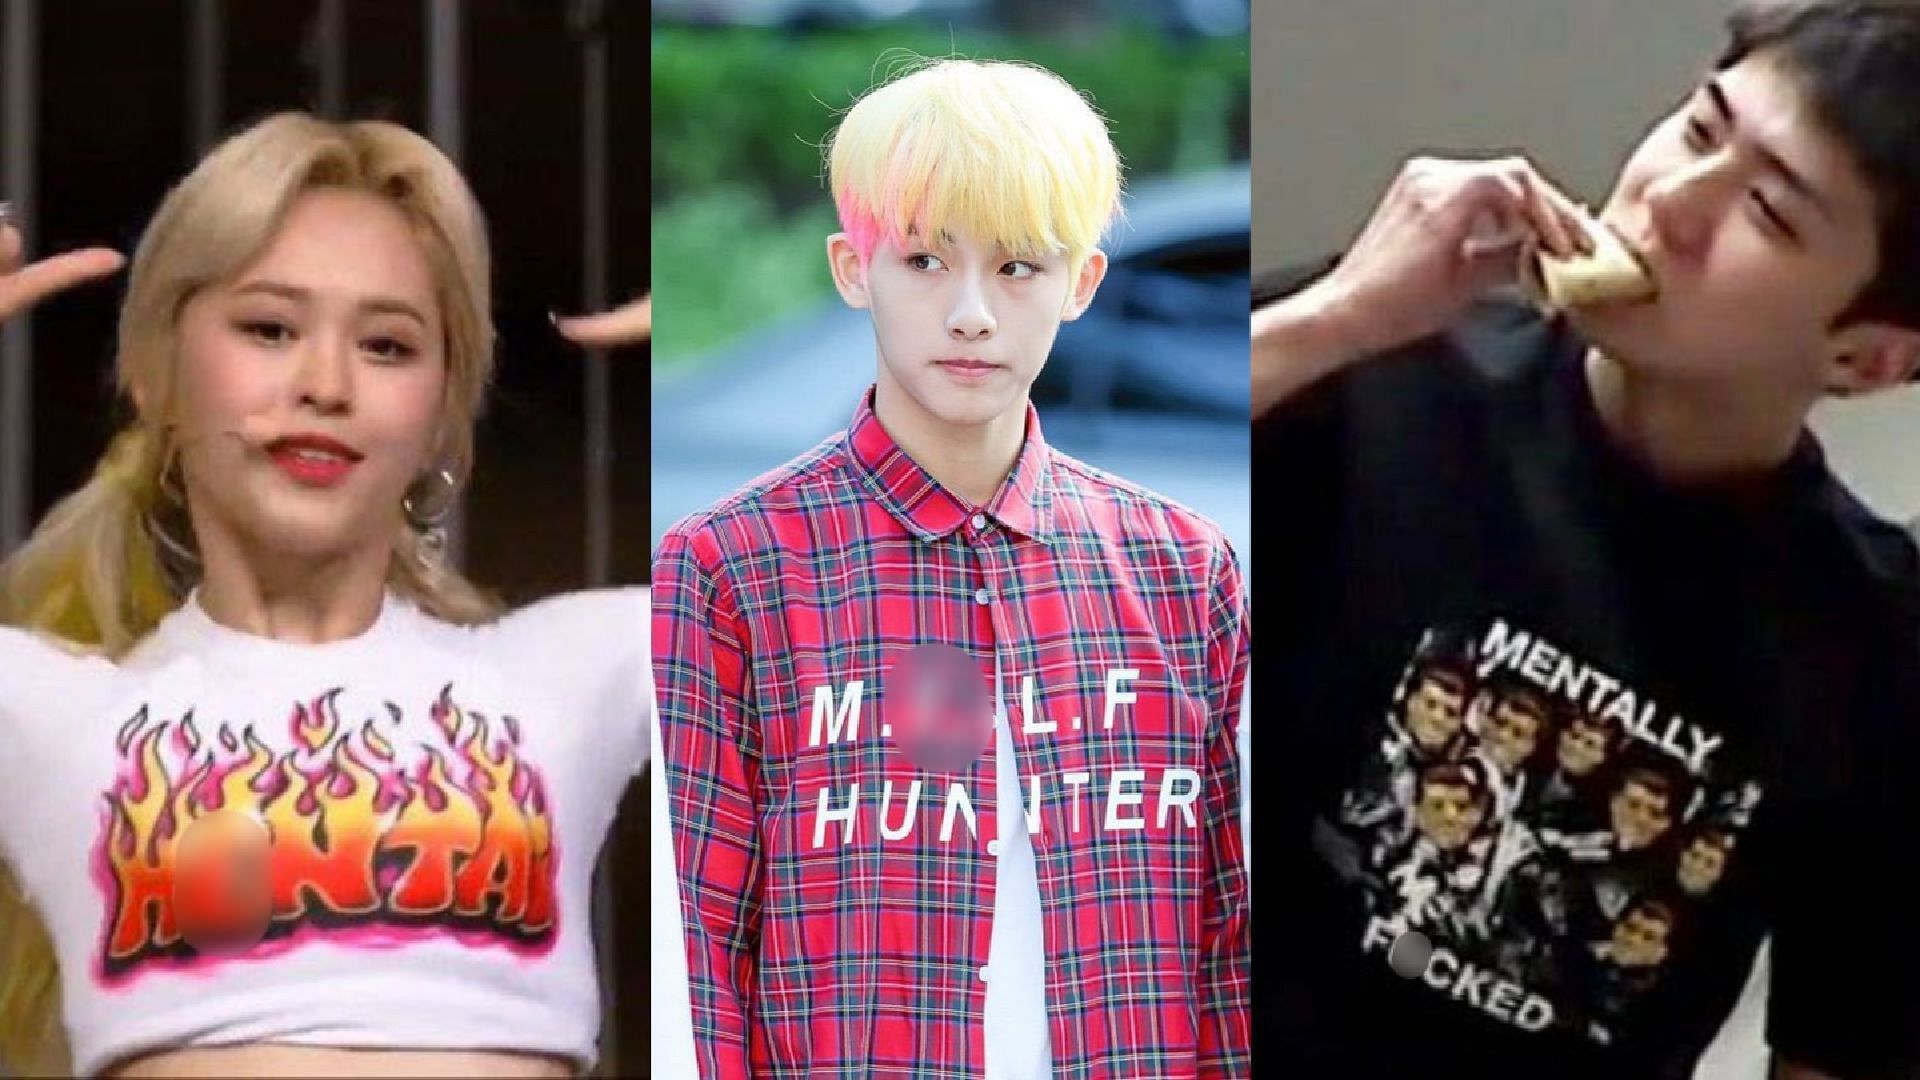 10 K-pop idols who wore outfits with R-rated words (Image via Twitter/@iconickpopoutfits)